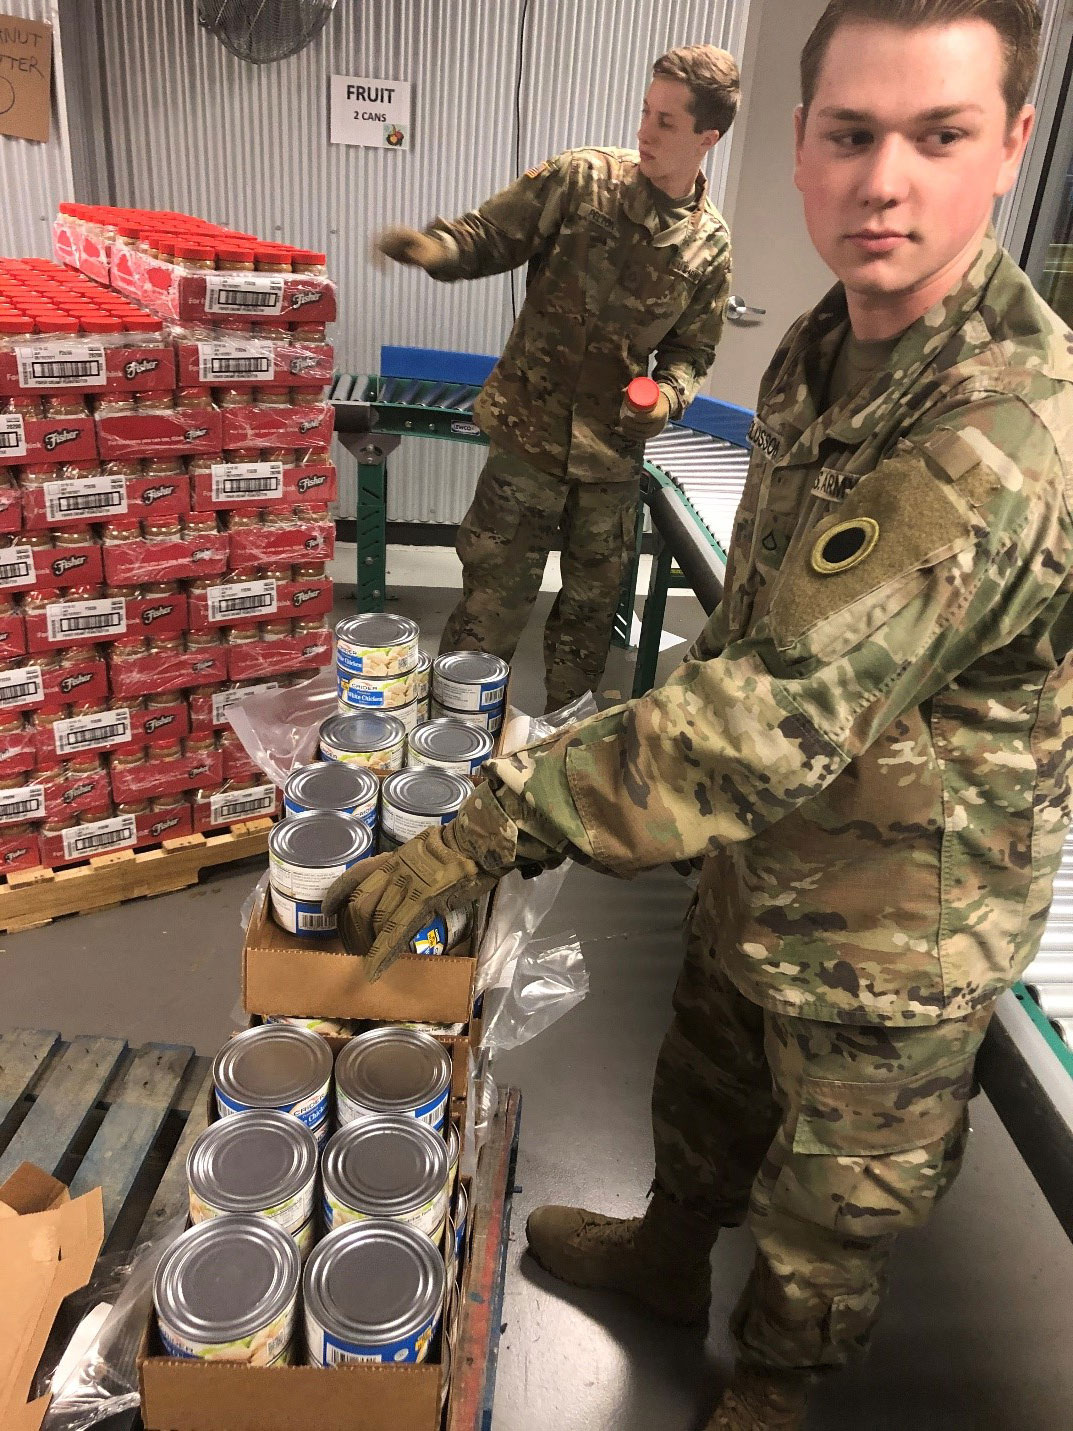 Soldier unloads canned chicken from boxes.